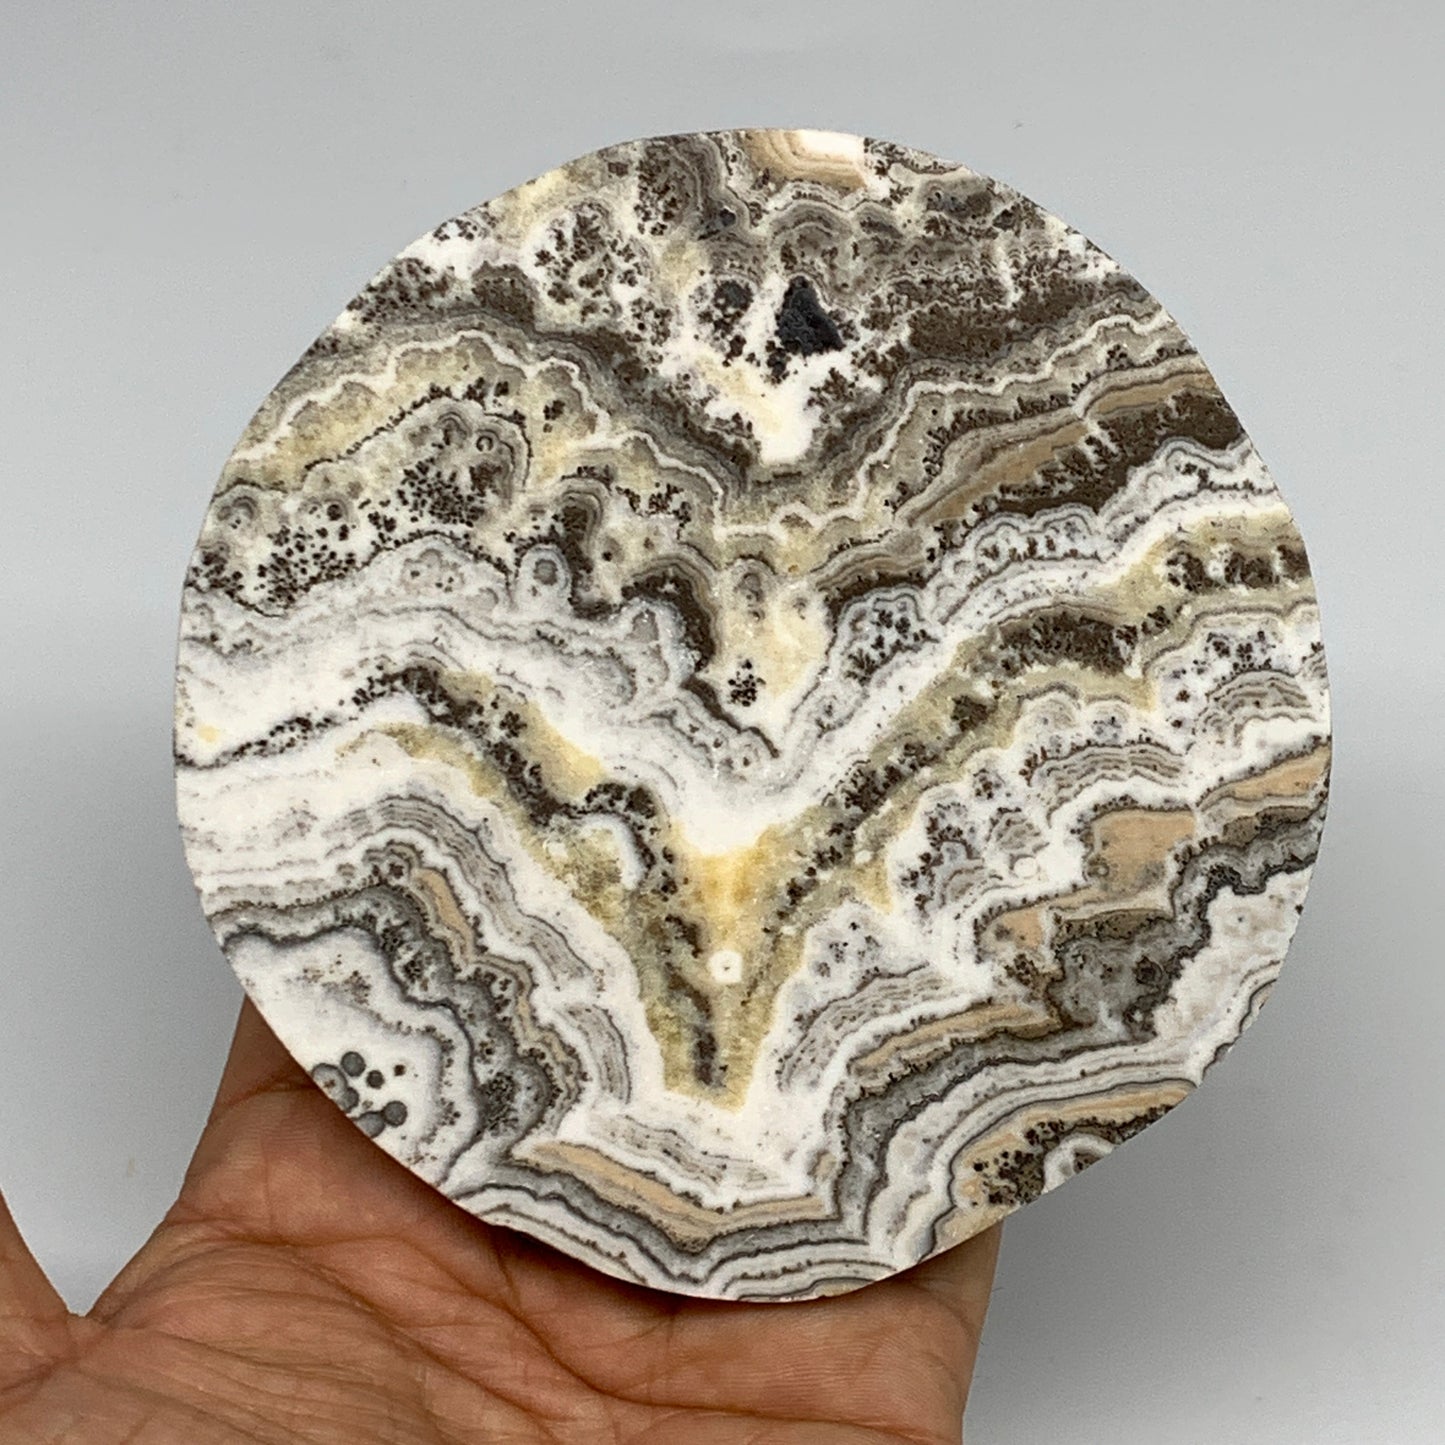 299.6g, 4.3"x0.6", Natural Picture Calcite Round Disc/Coaster @Mexico, B25472